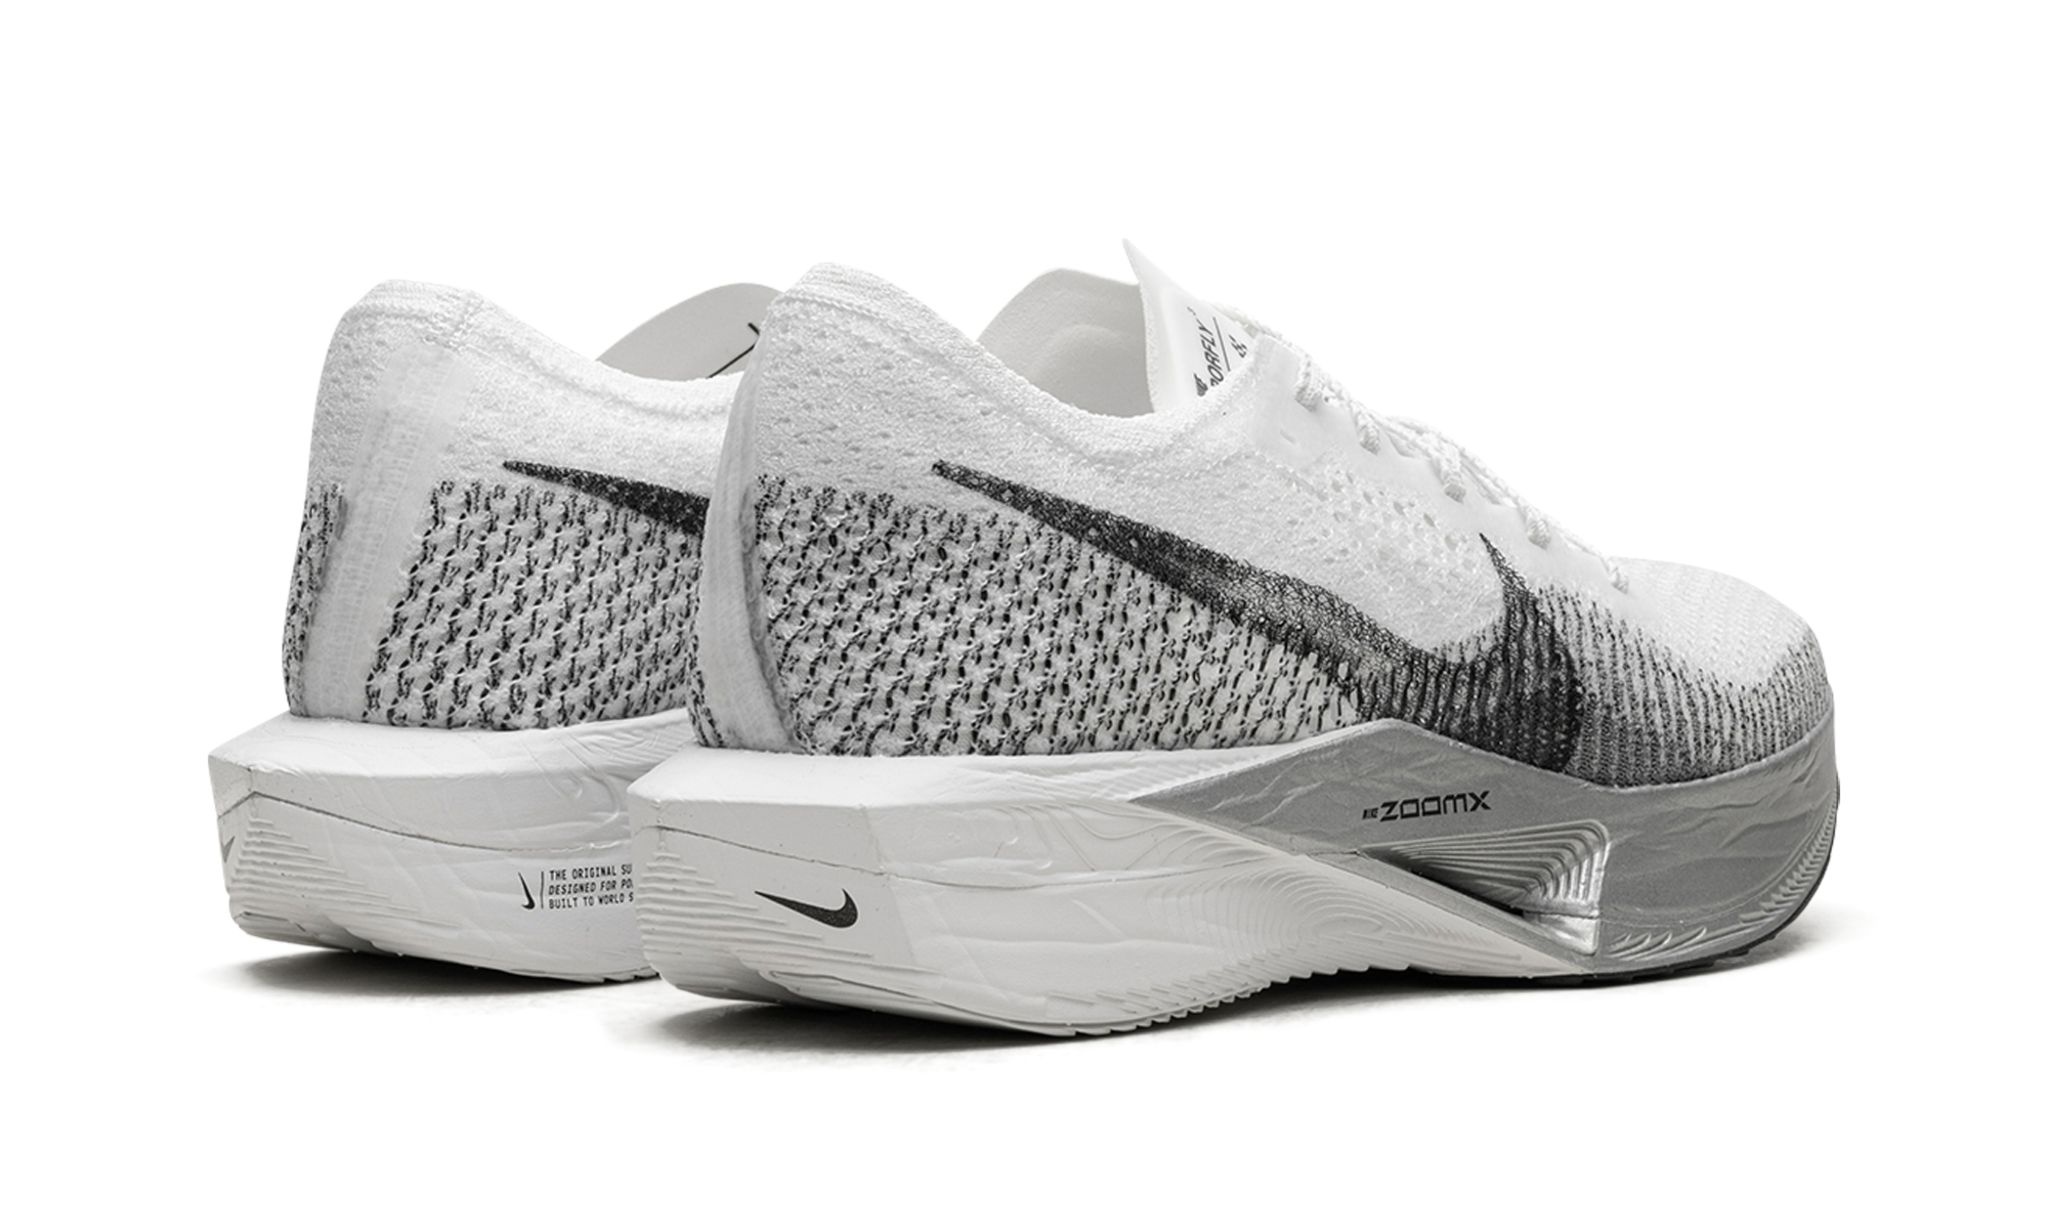 ZOOMX VAPORFLY 3 WMNS "White Particle Grey" - 3